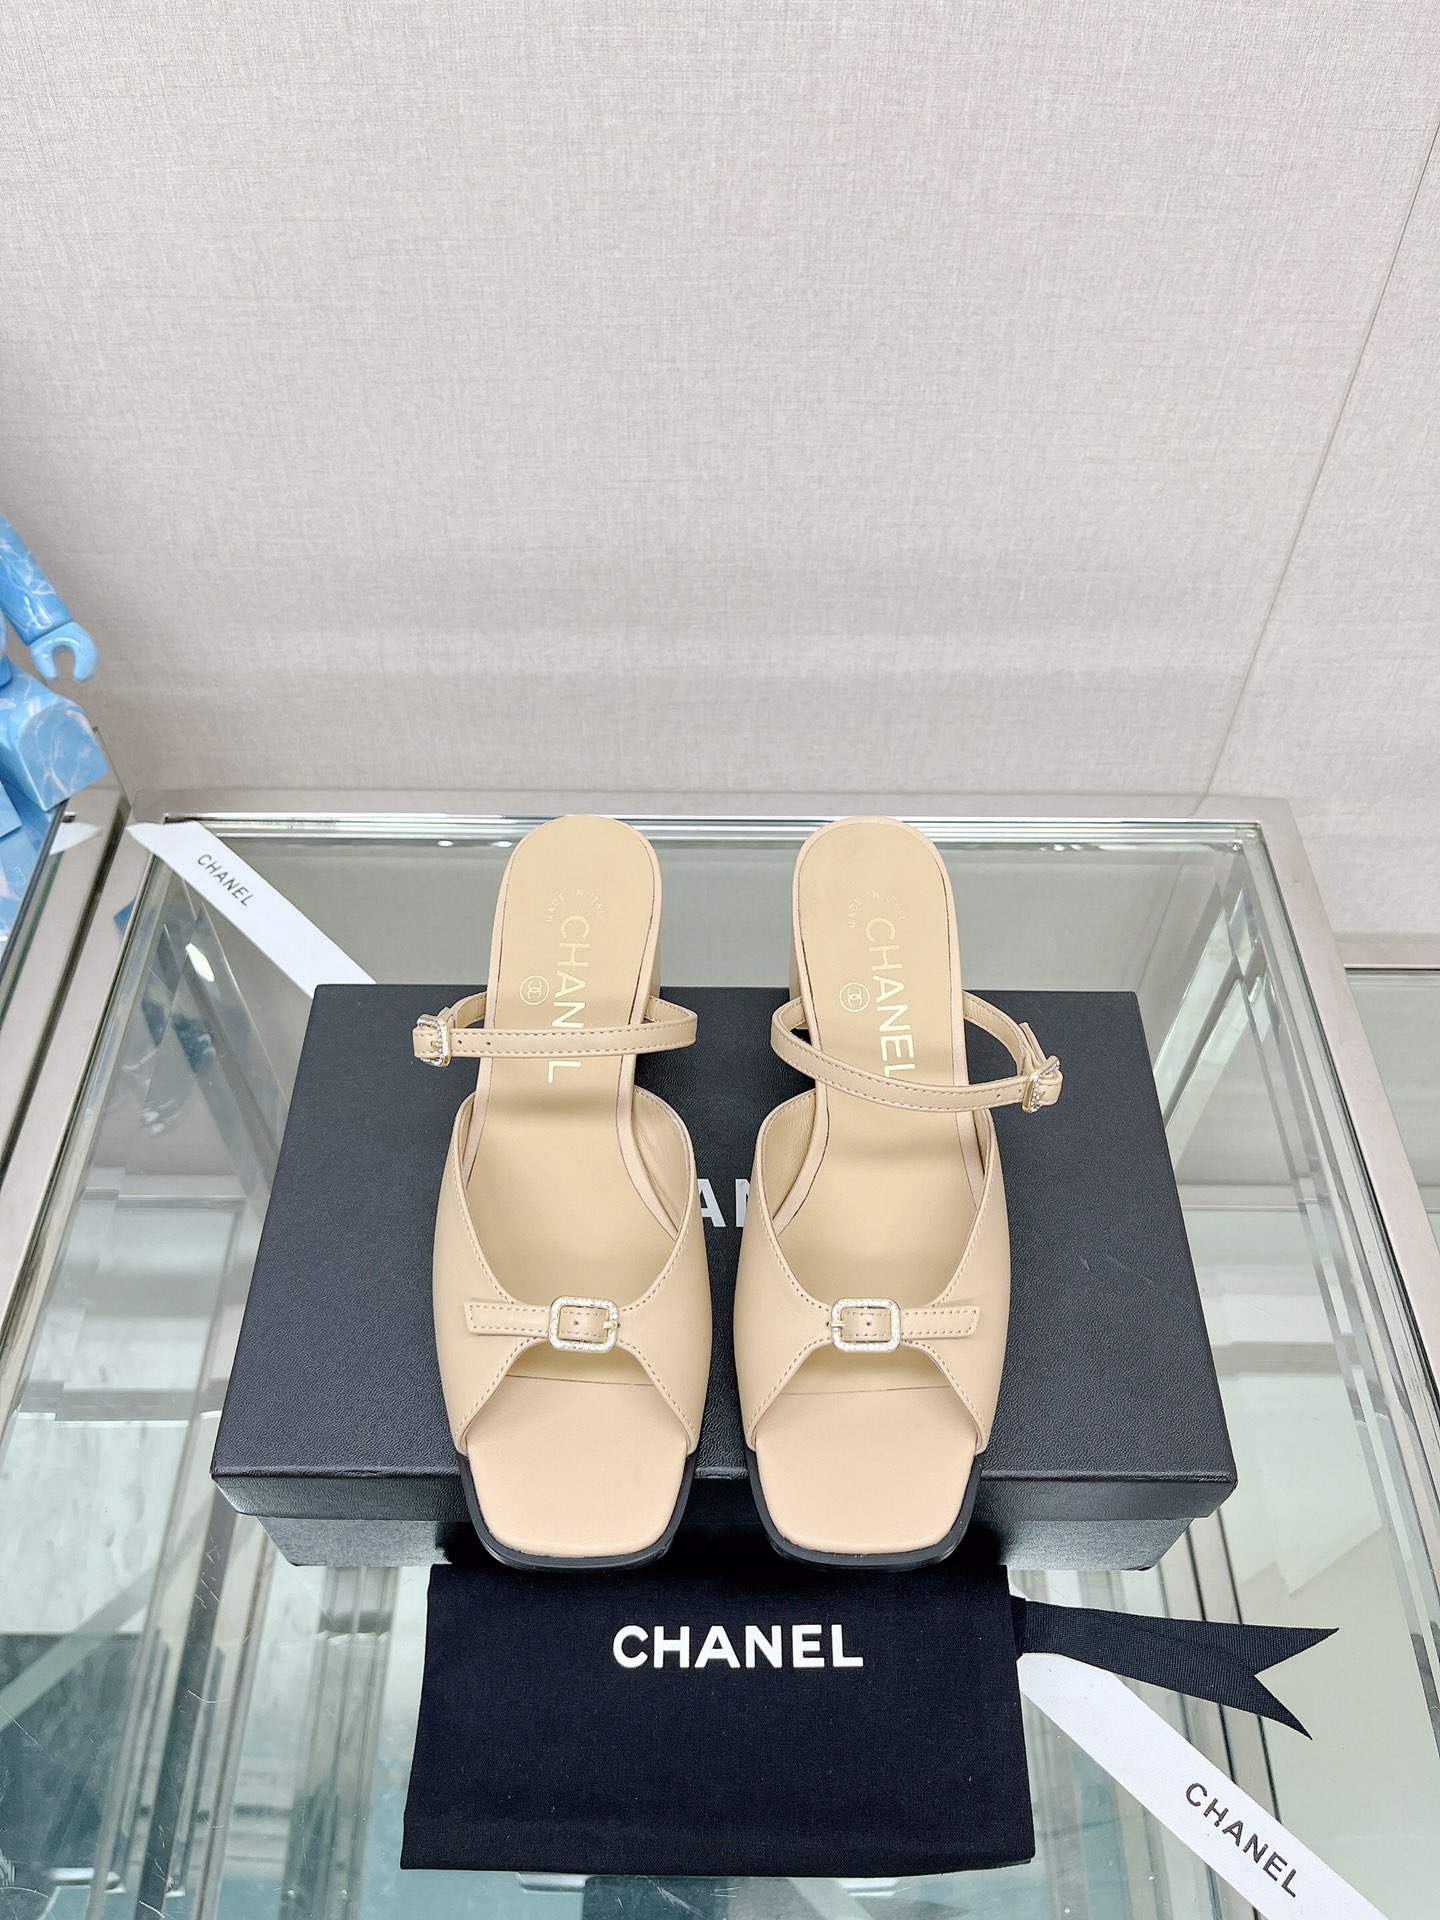 Chanel Shoes Slippers for sale cheap now
 Genuine Leather Lambskin Sheepskin Vintage